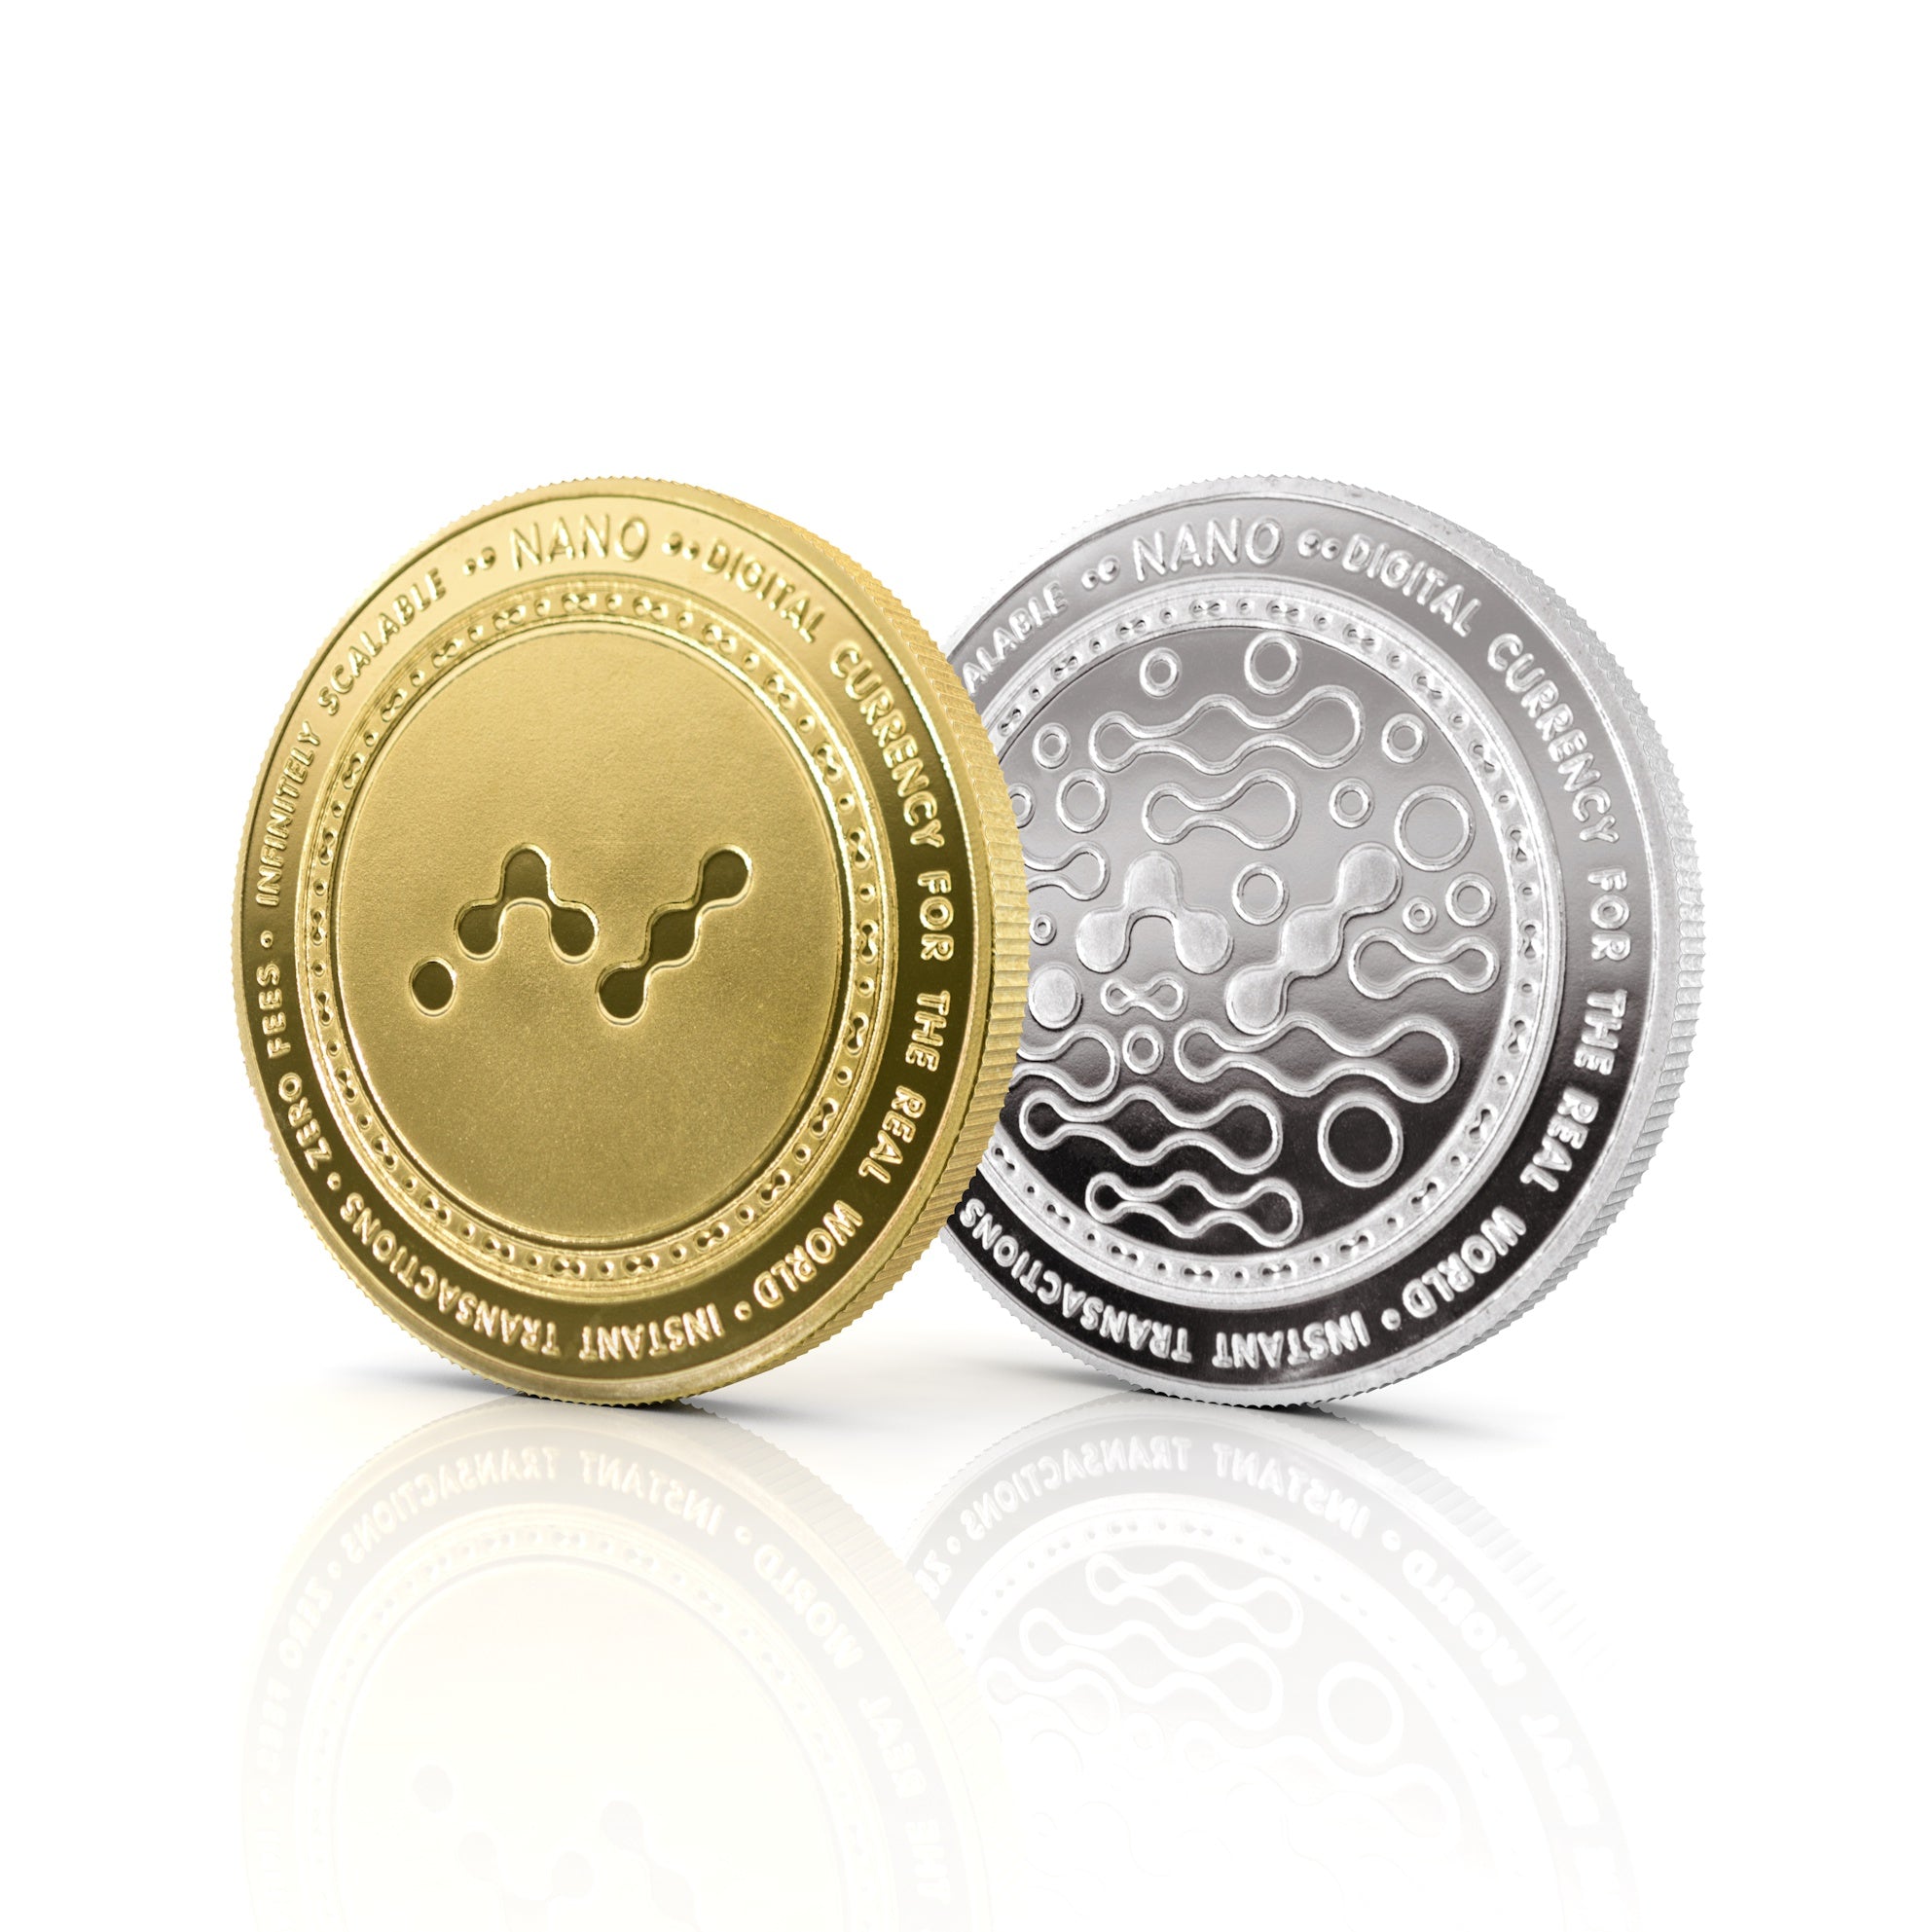 Cryptochips | Nano Physical Crypto Coin. Collectable cryptocurrency merch you can hodl